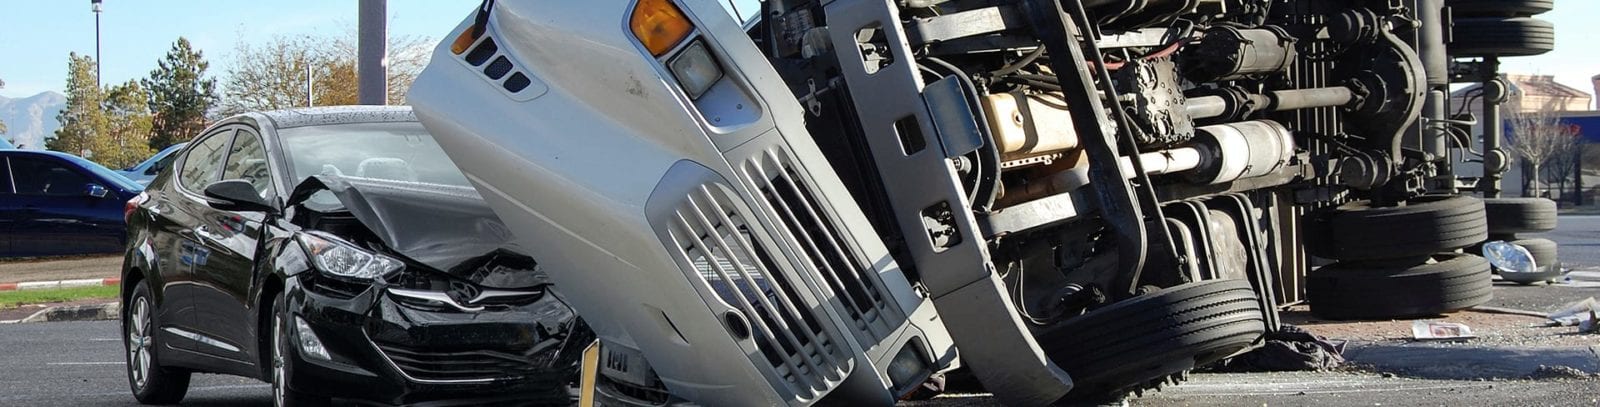 Aftermath of 18-wheeler Truck Accident Stock Photo